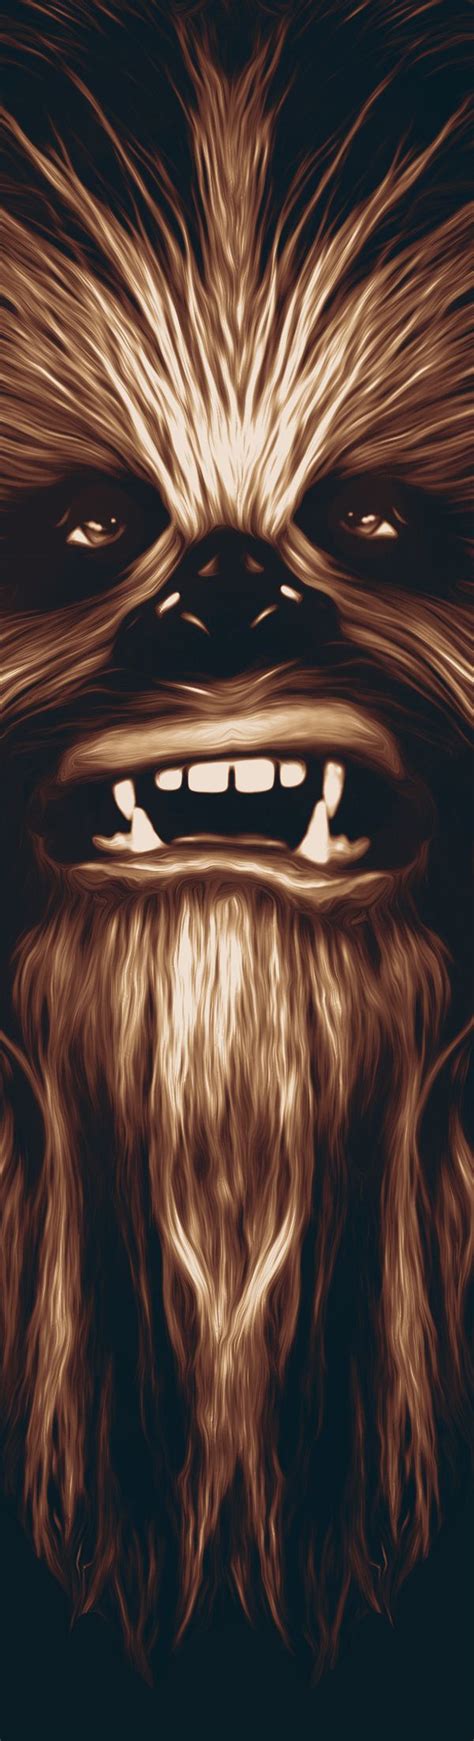 57 Best Wookie Images On Pinterest Star Wars Starwars And Chewbacca